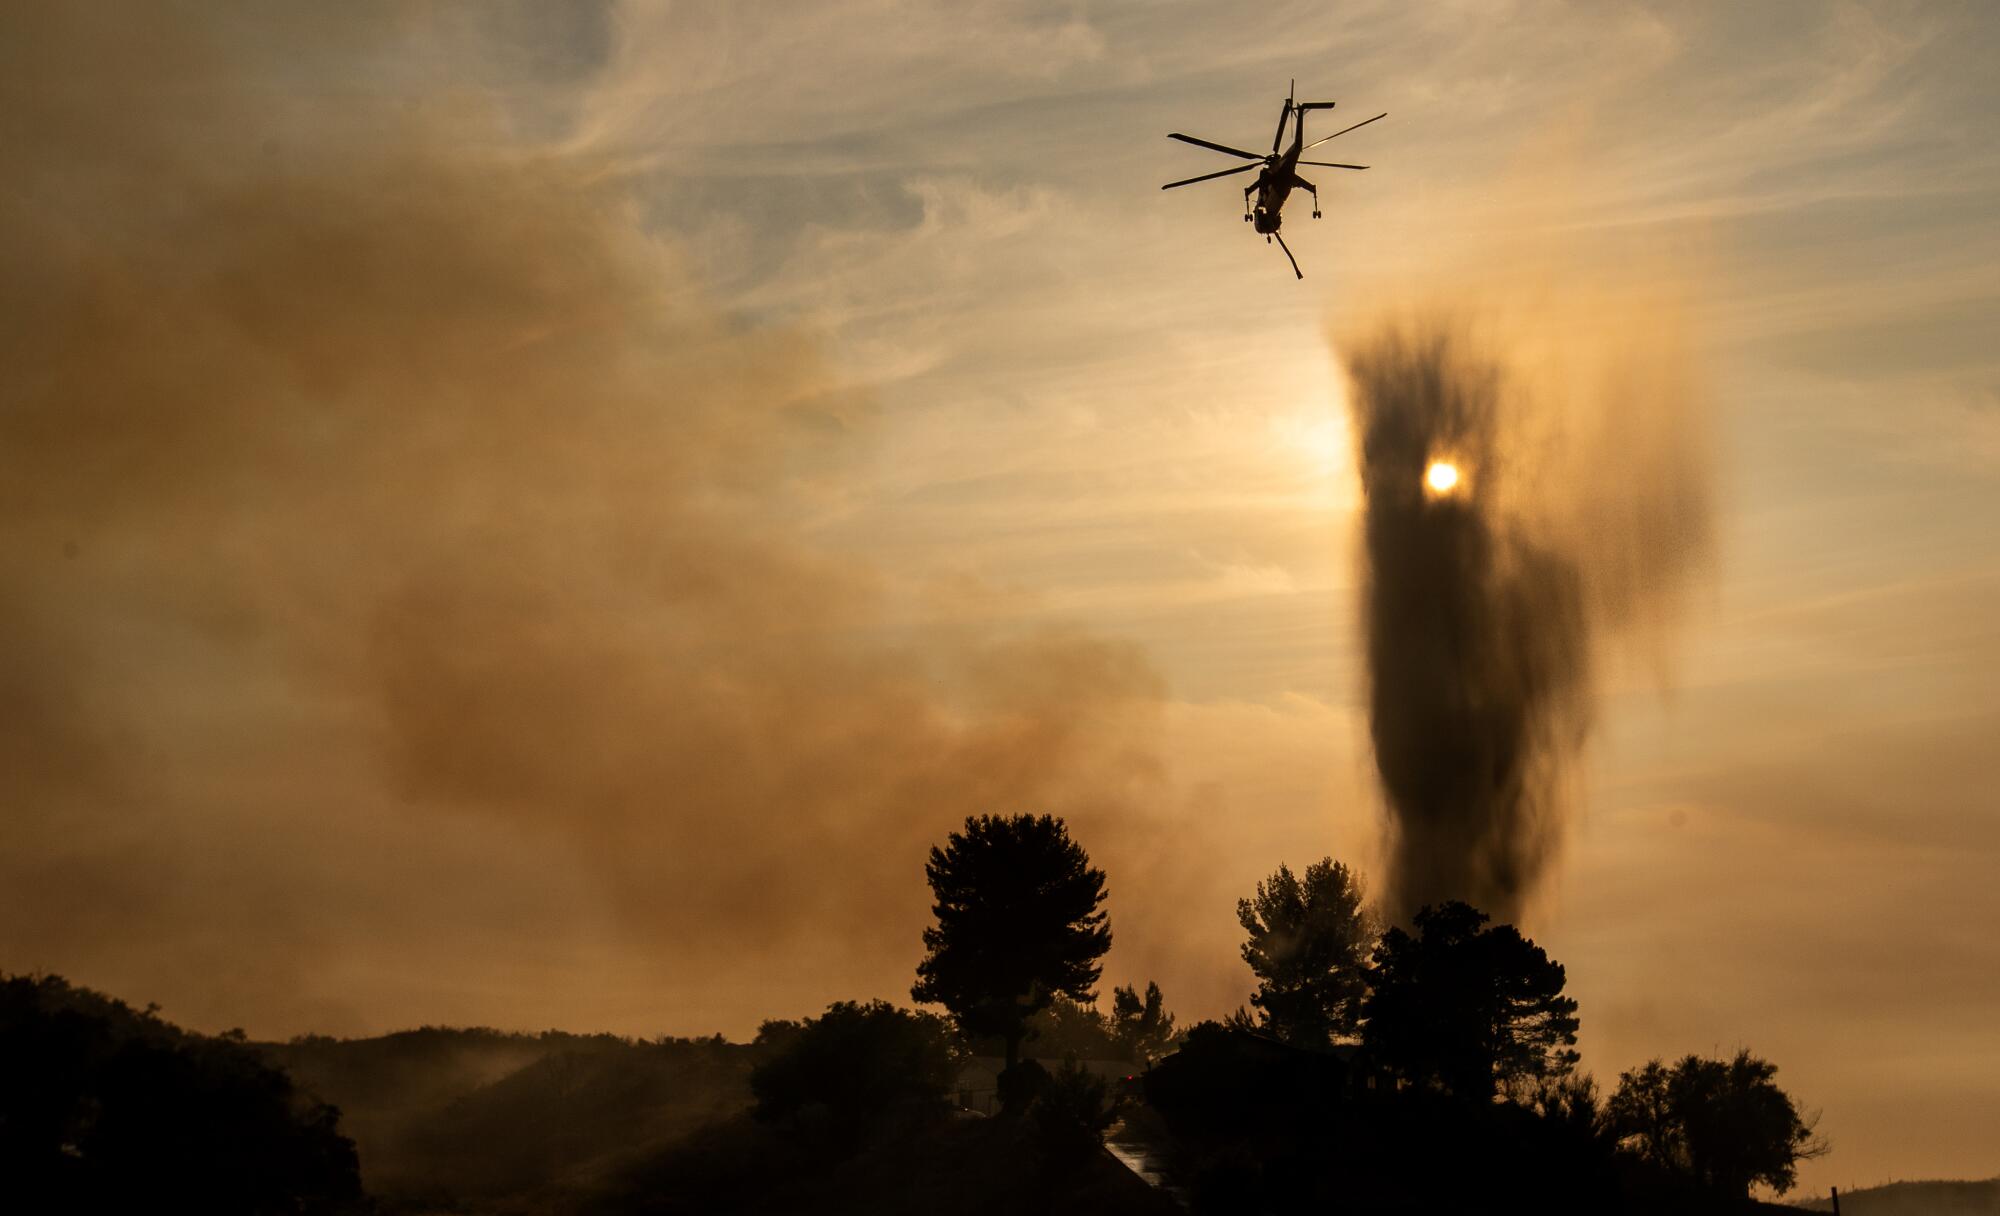 A helicopter is silhouetted against a smoky sky.